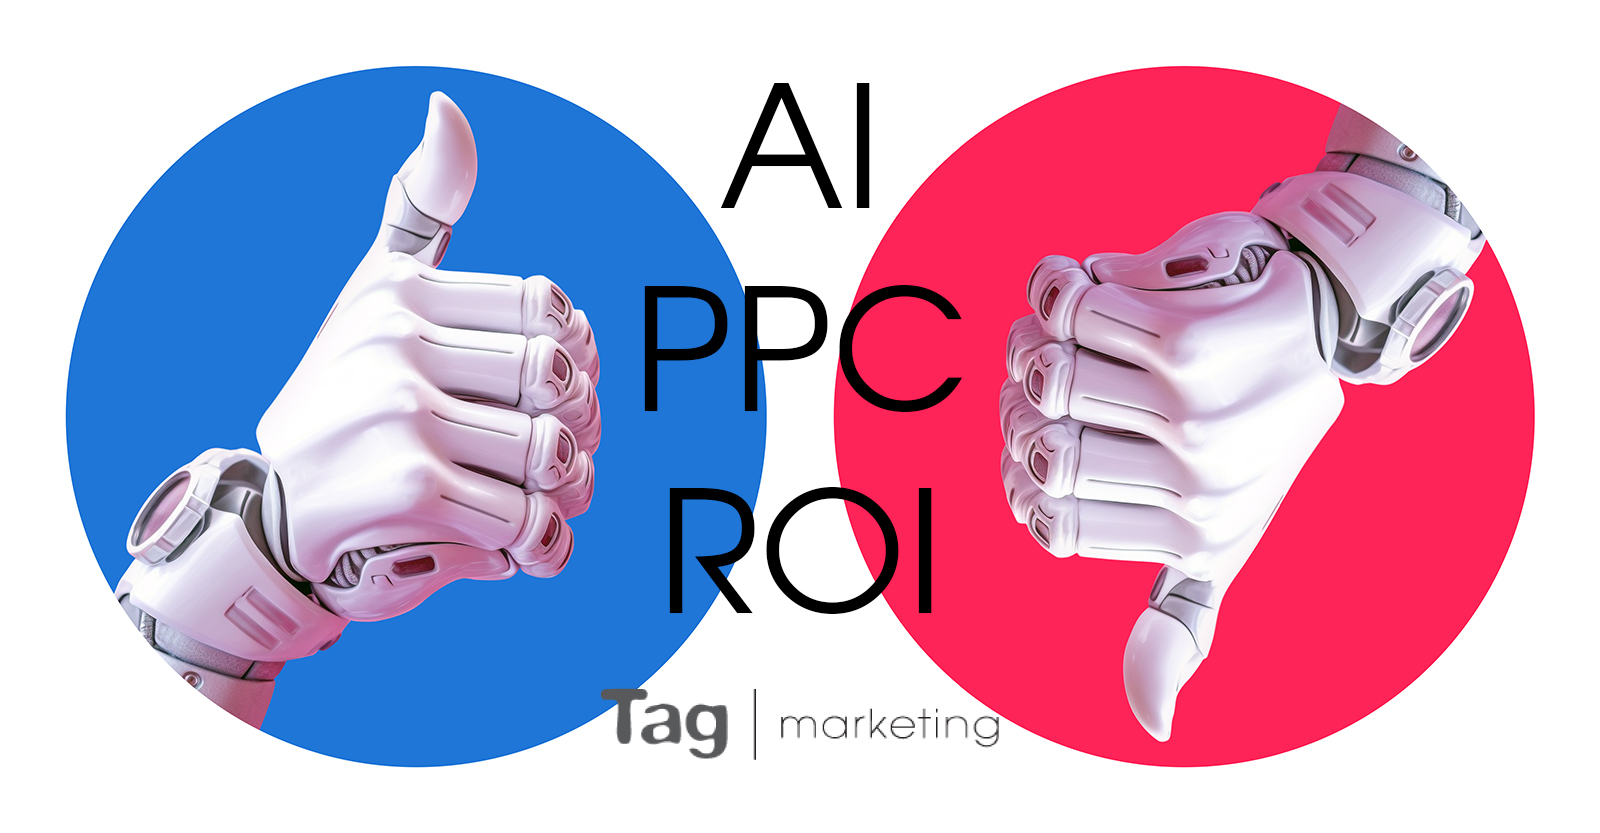 Has AI Increased or Decreased PPC Return on Investment?